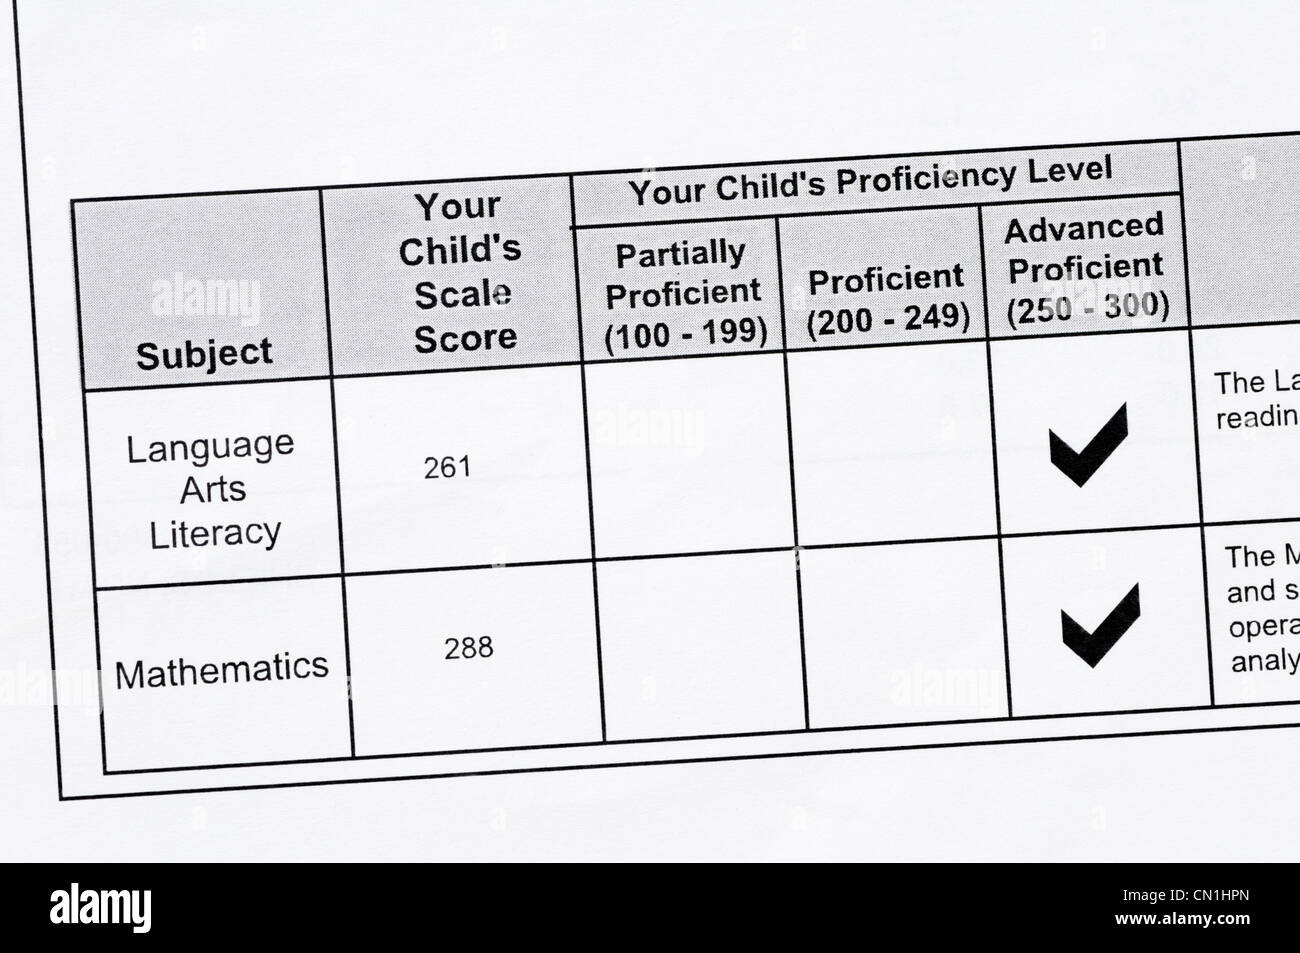 Student score report standardized state tests in math and language arts. The student scored in the Advanced range for both. Stock Photo